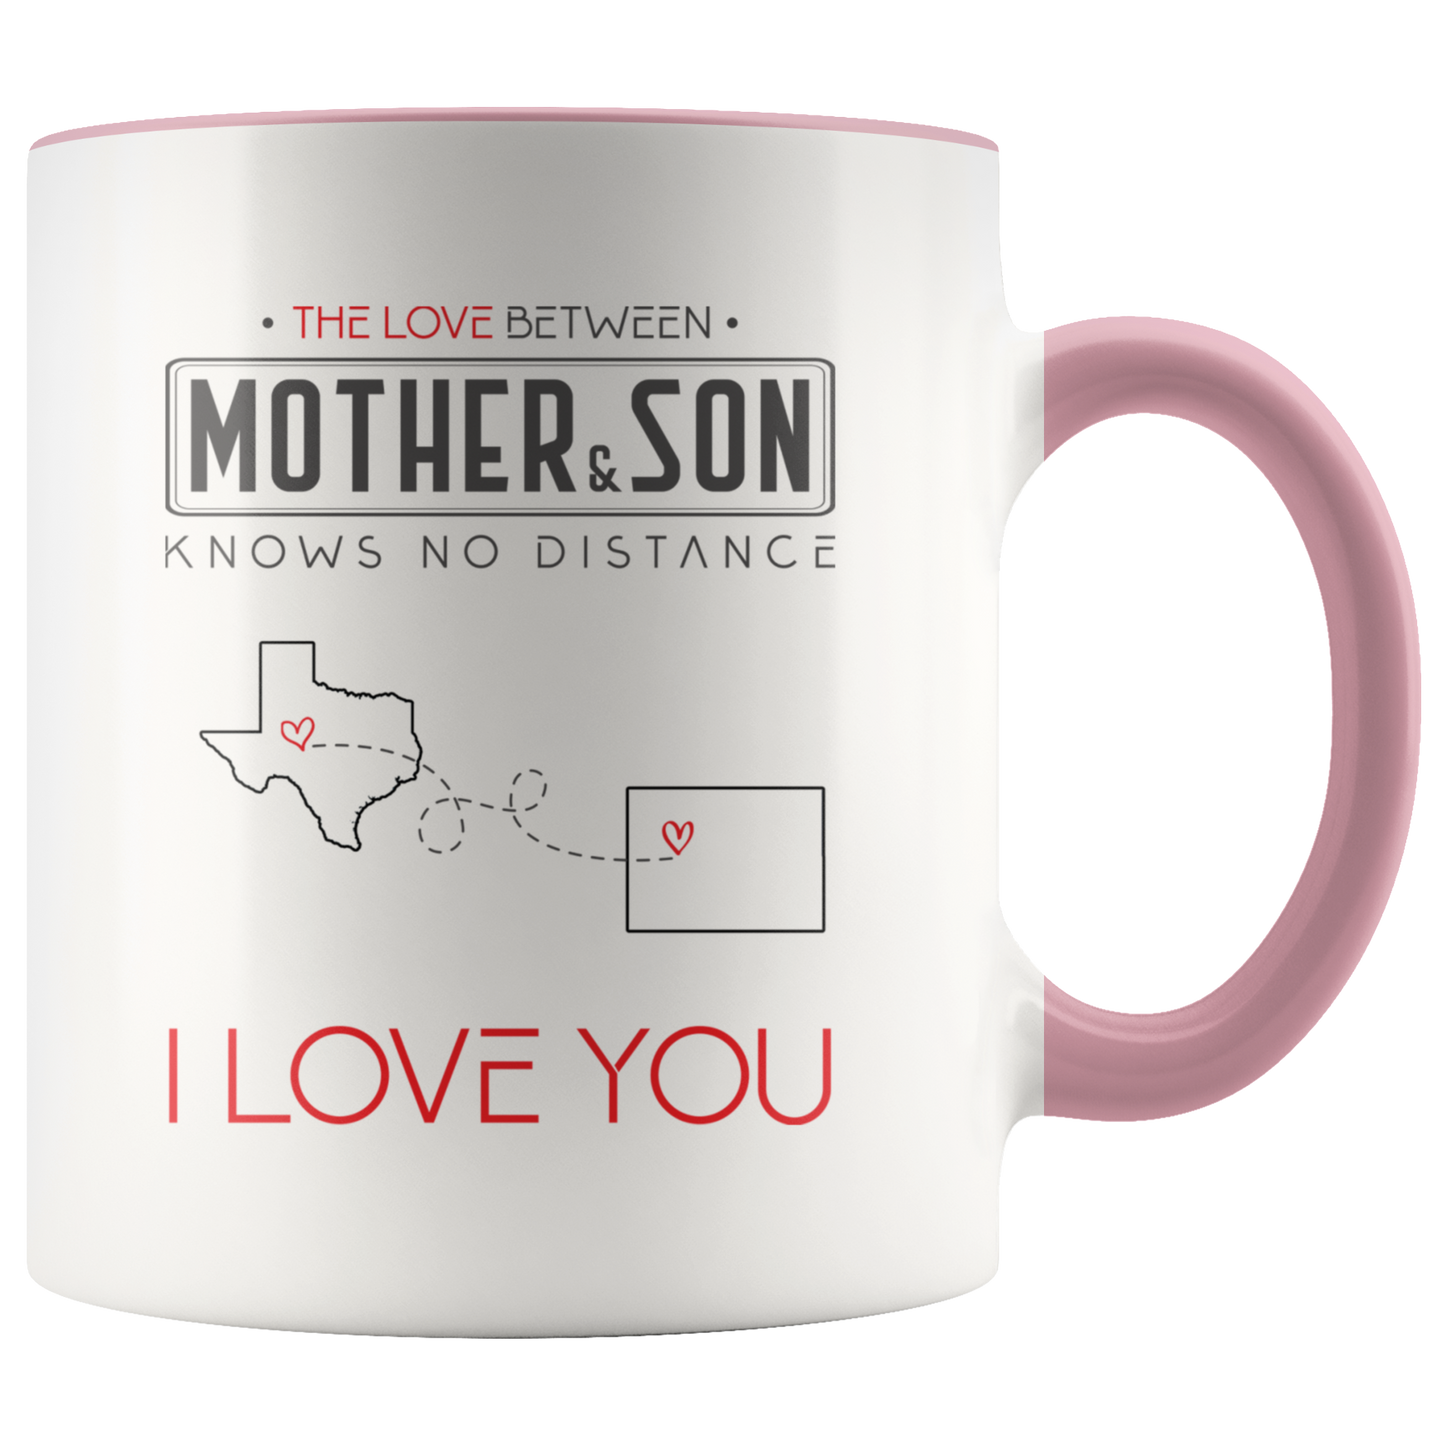 ND-21315402-sp-24132 - [ Texas | Colorado ]Mom And Son Accent Mug 11 oz Red - The Love Between Mother A